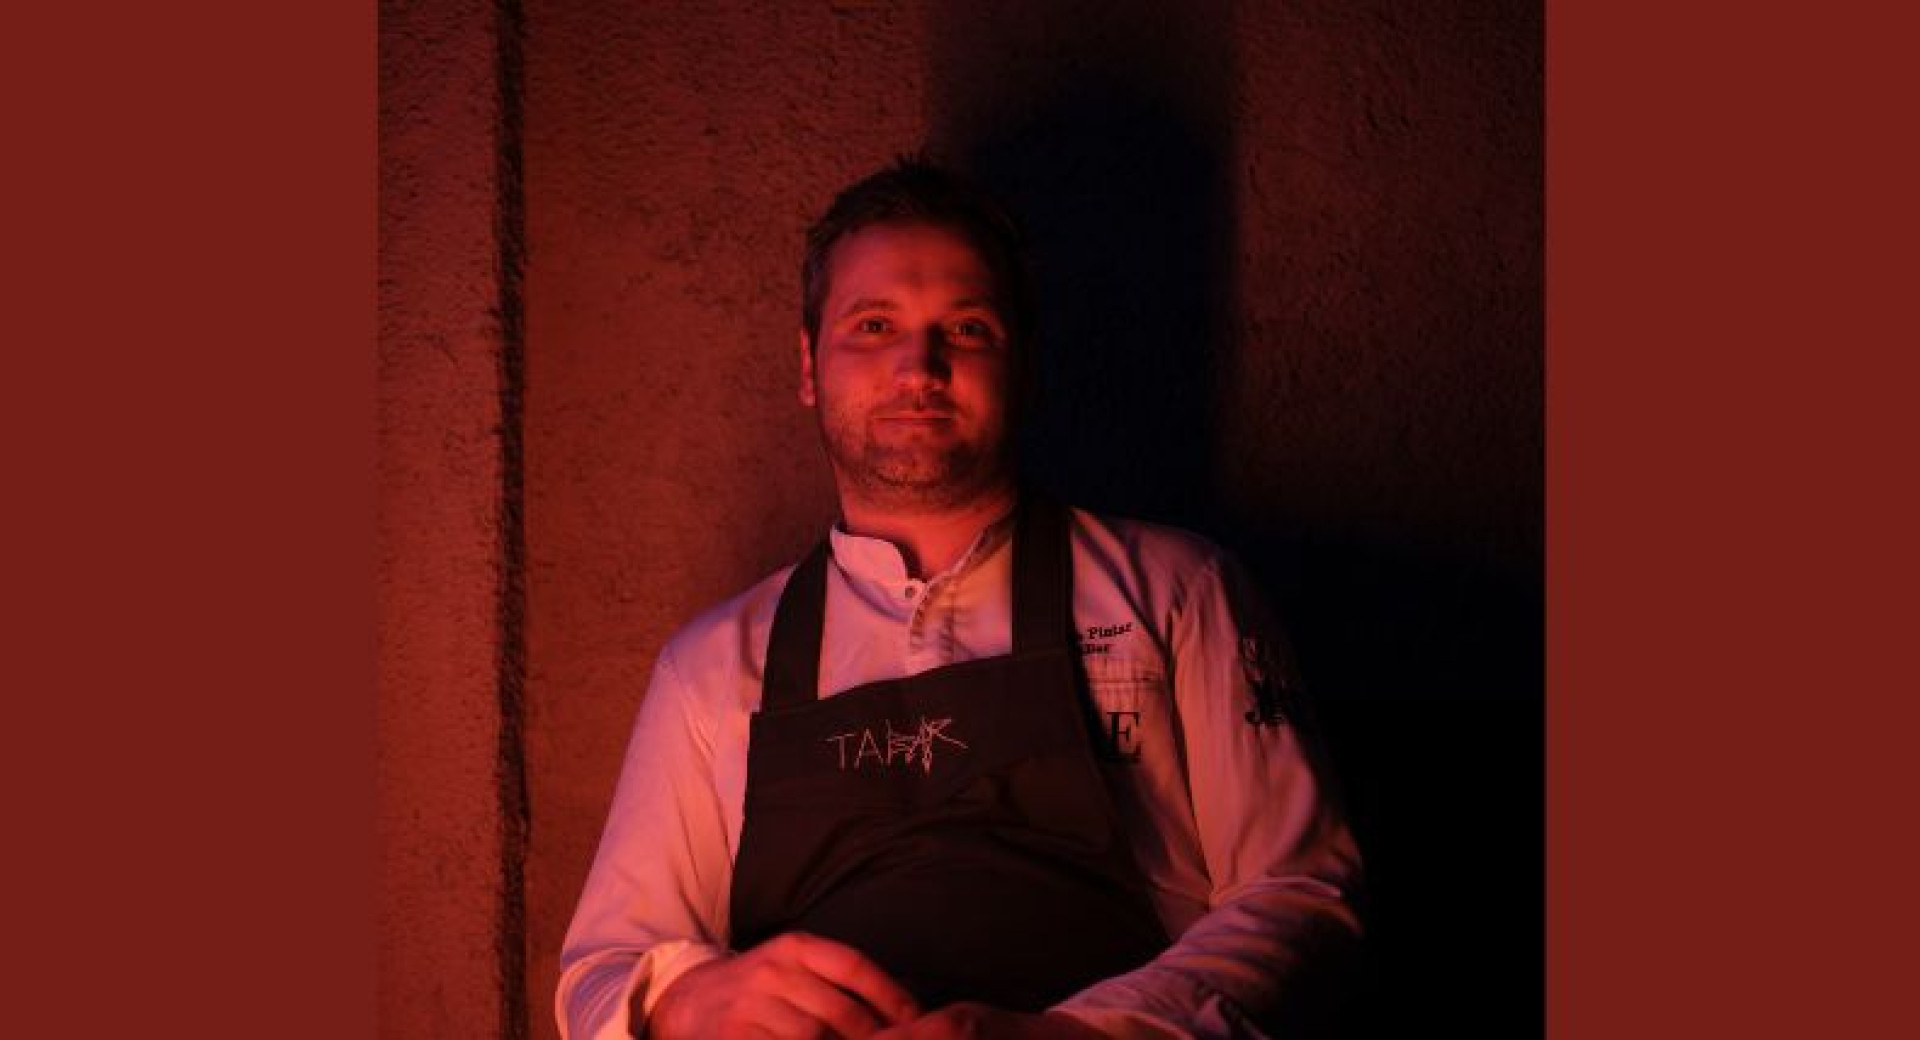 Man in a white shirt with a black apron, red lighting